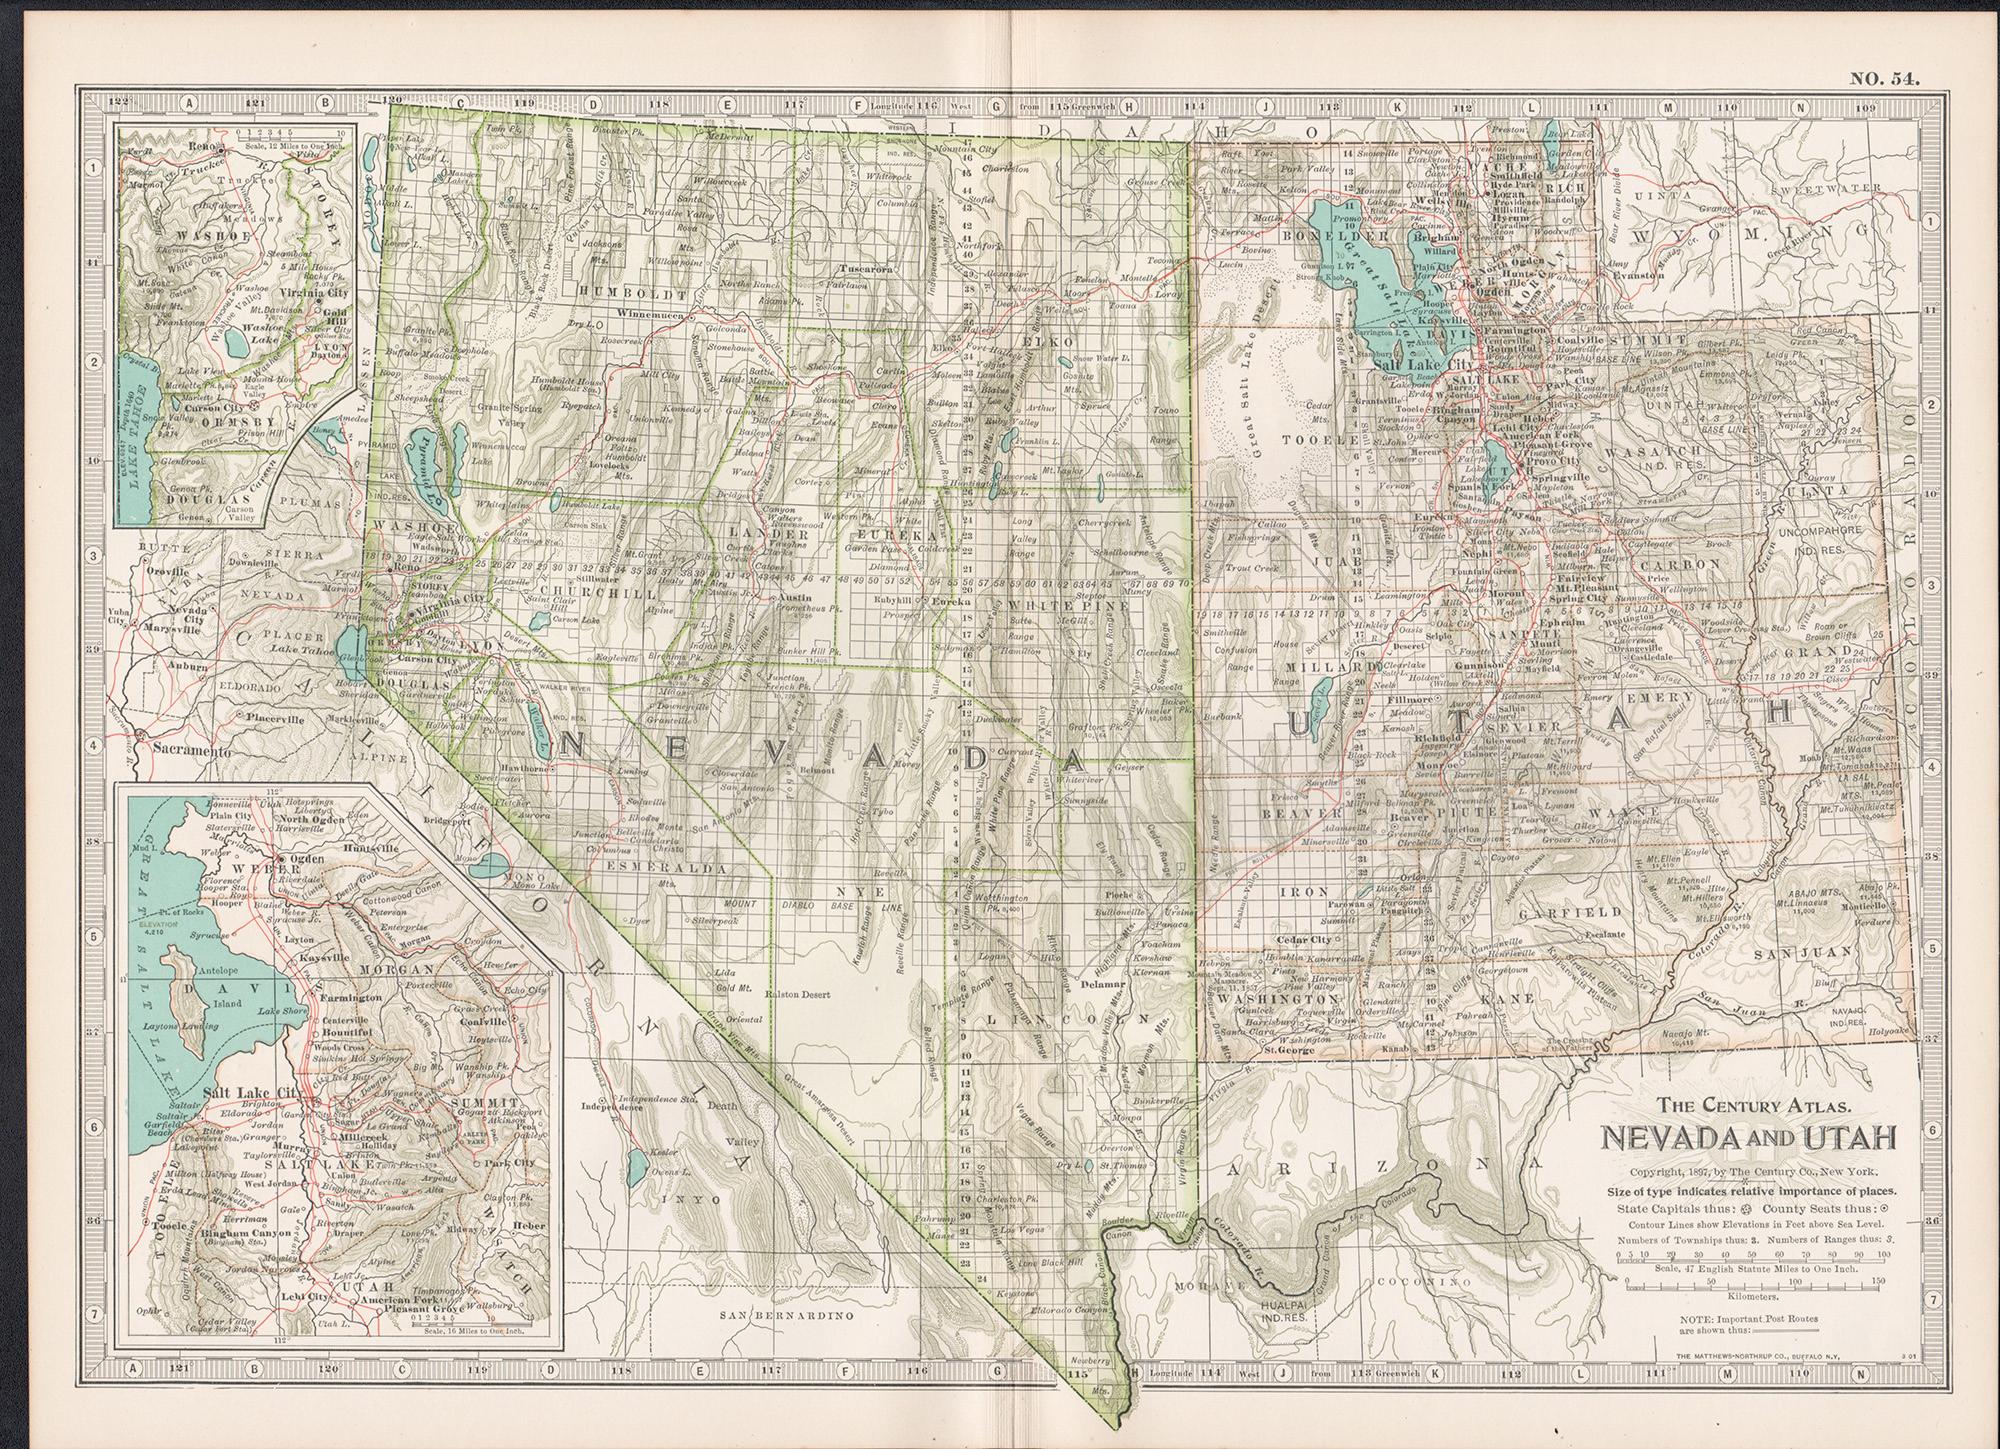 Nevada and Utah. USA. Century Atlas state antique vintage map - Print by Unknown